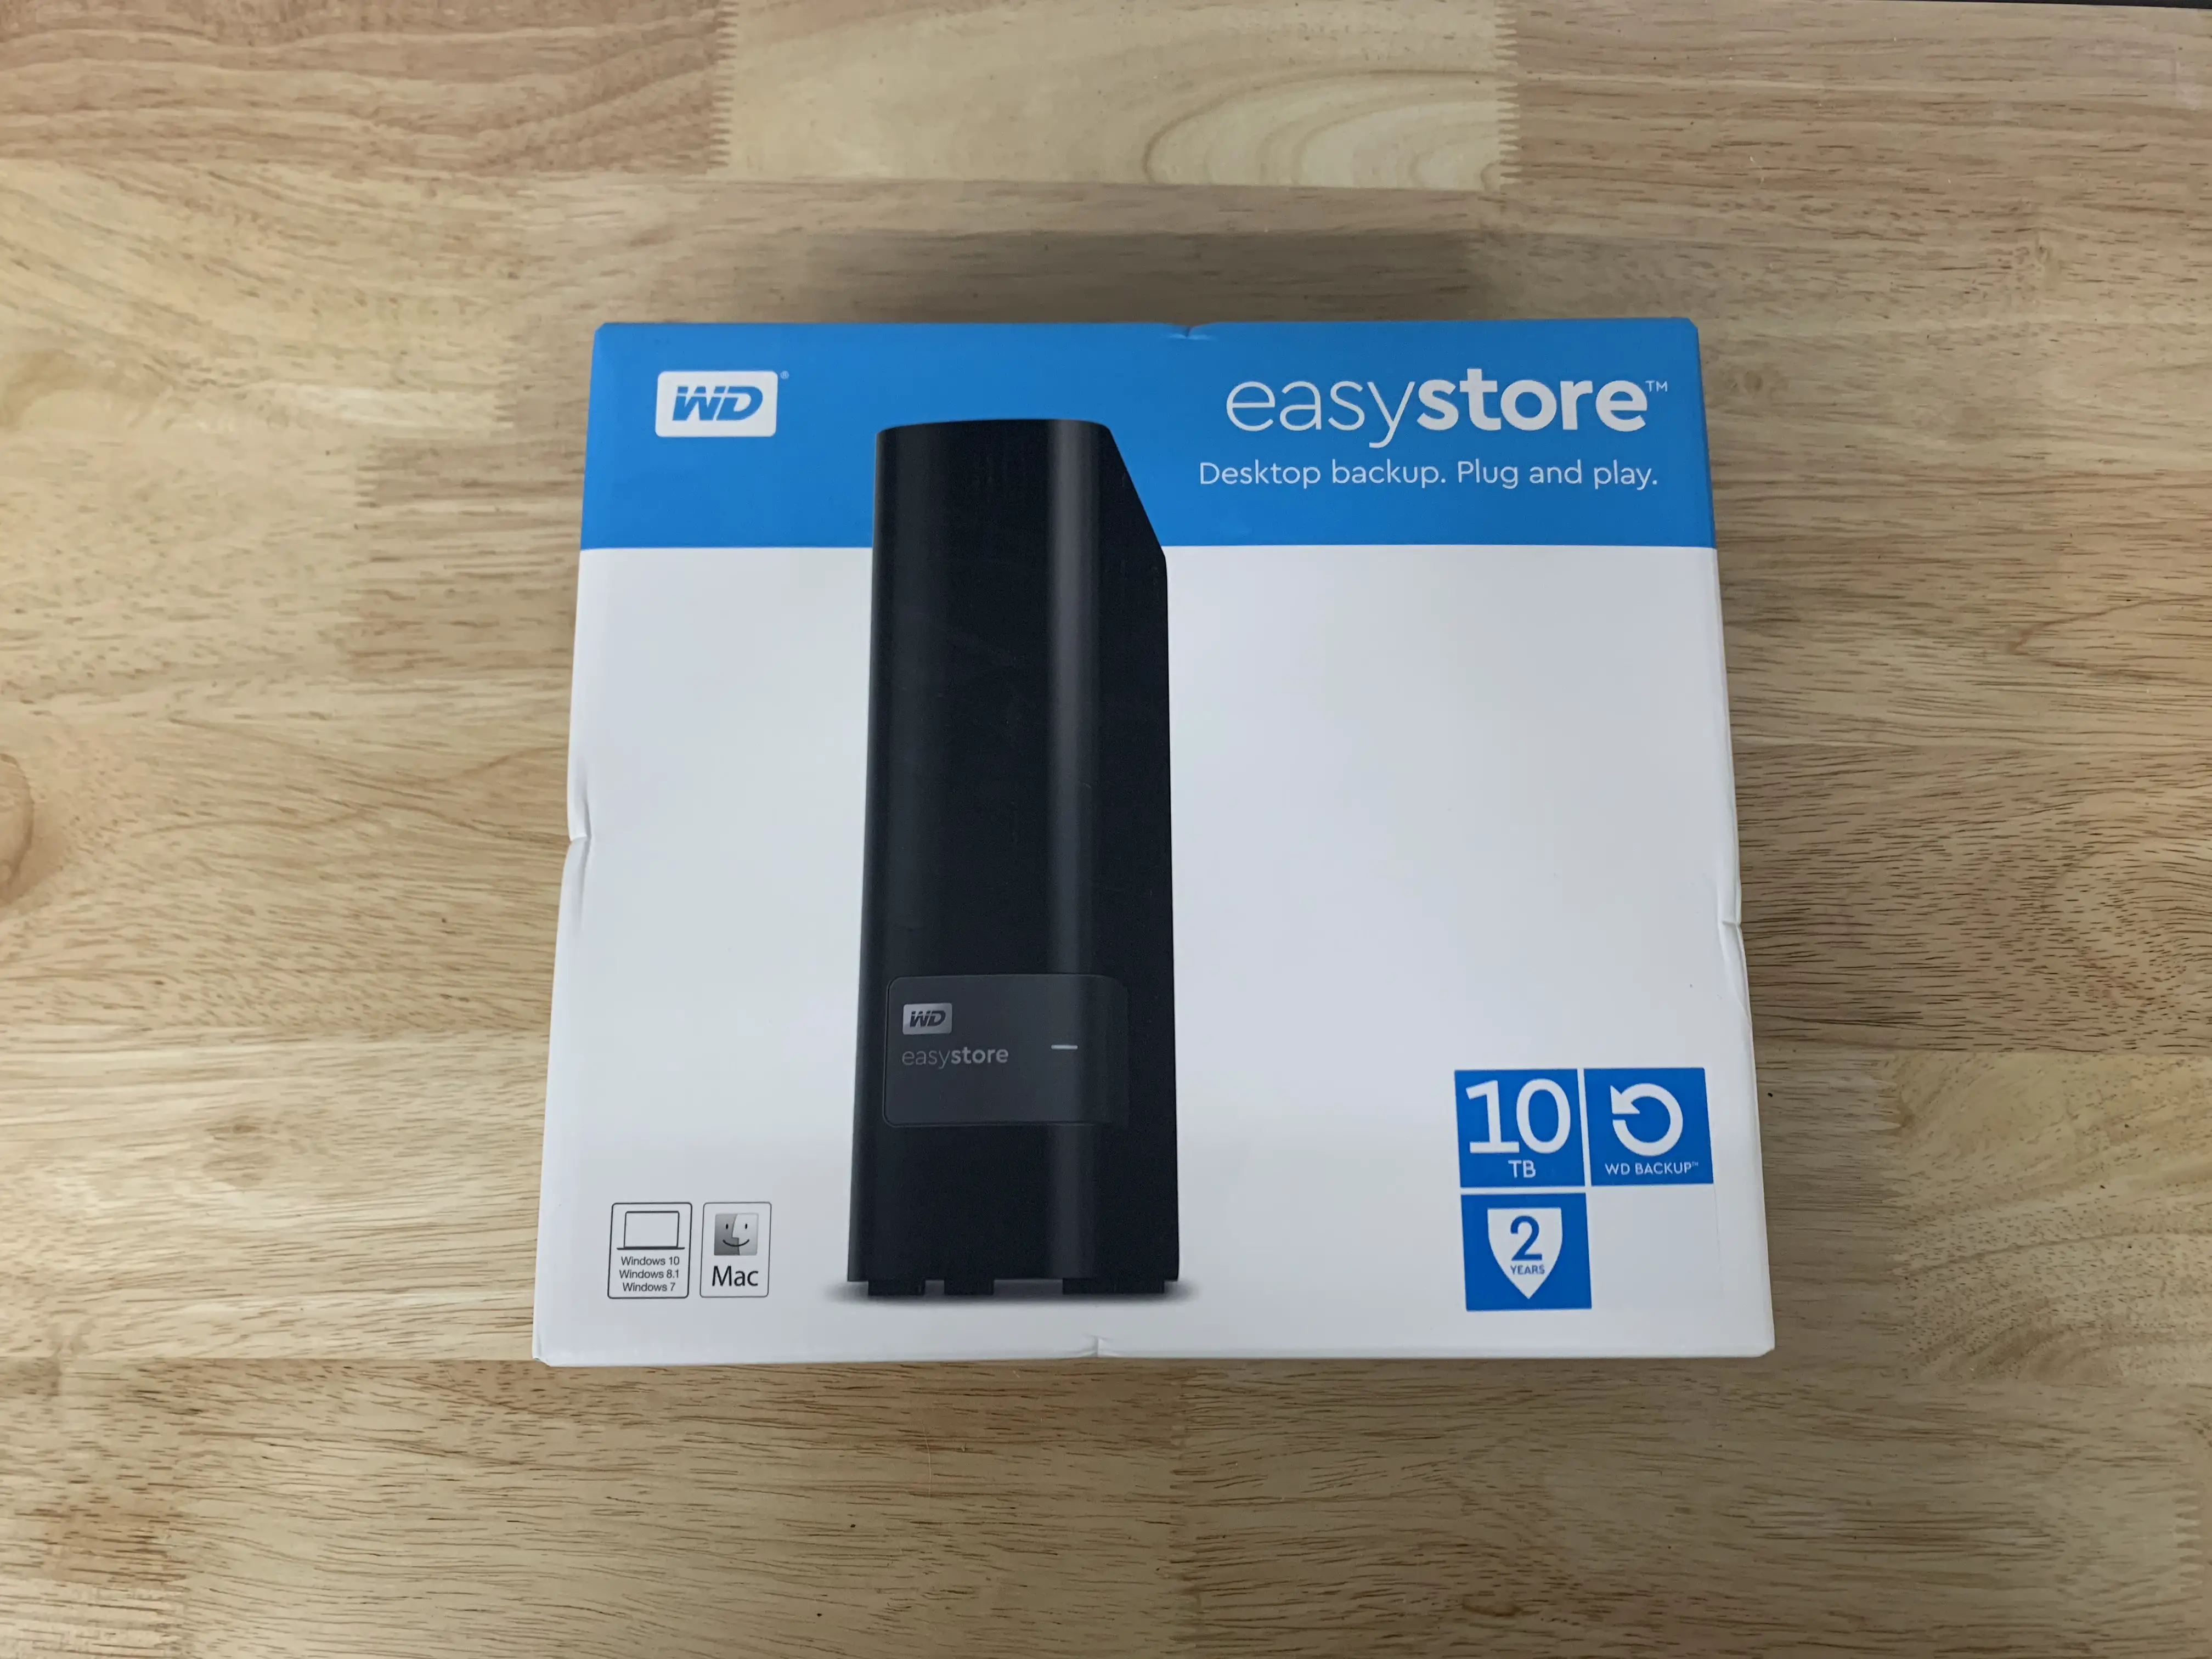 How To Shuck A Western Digital Easystore Or Elements External Drive